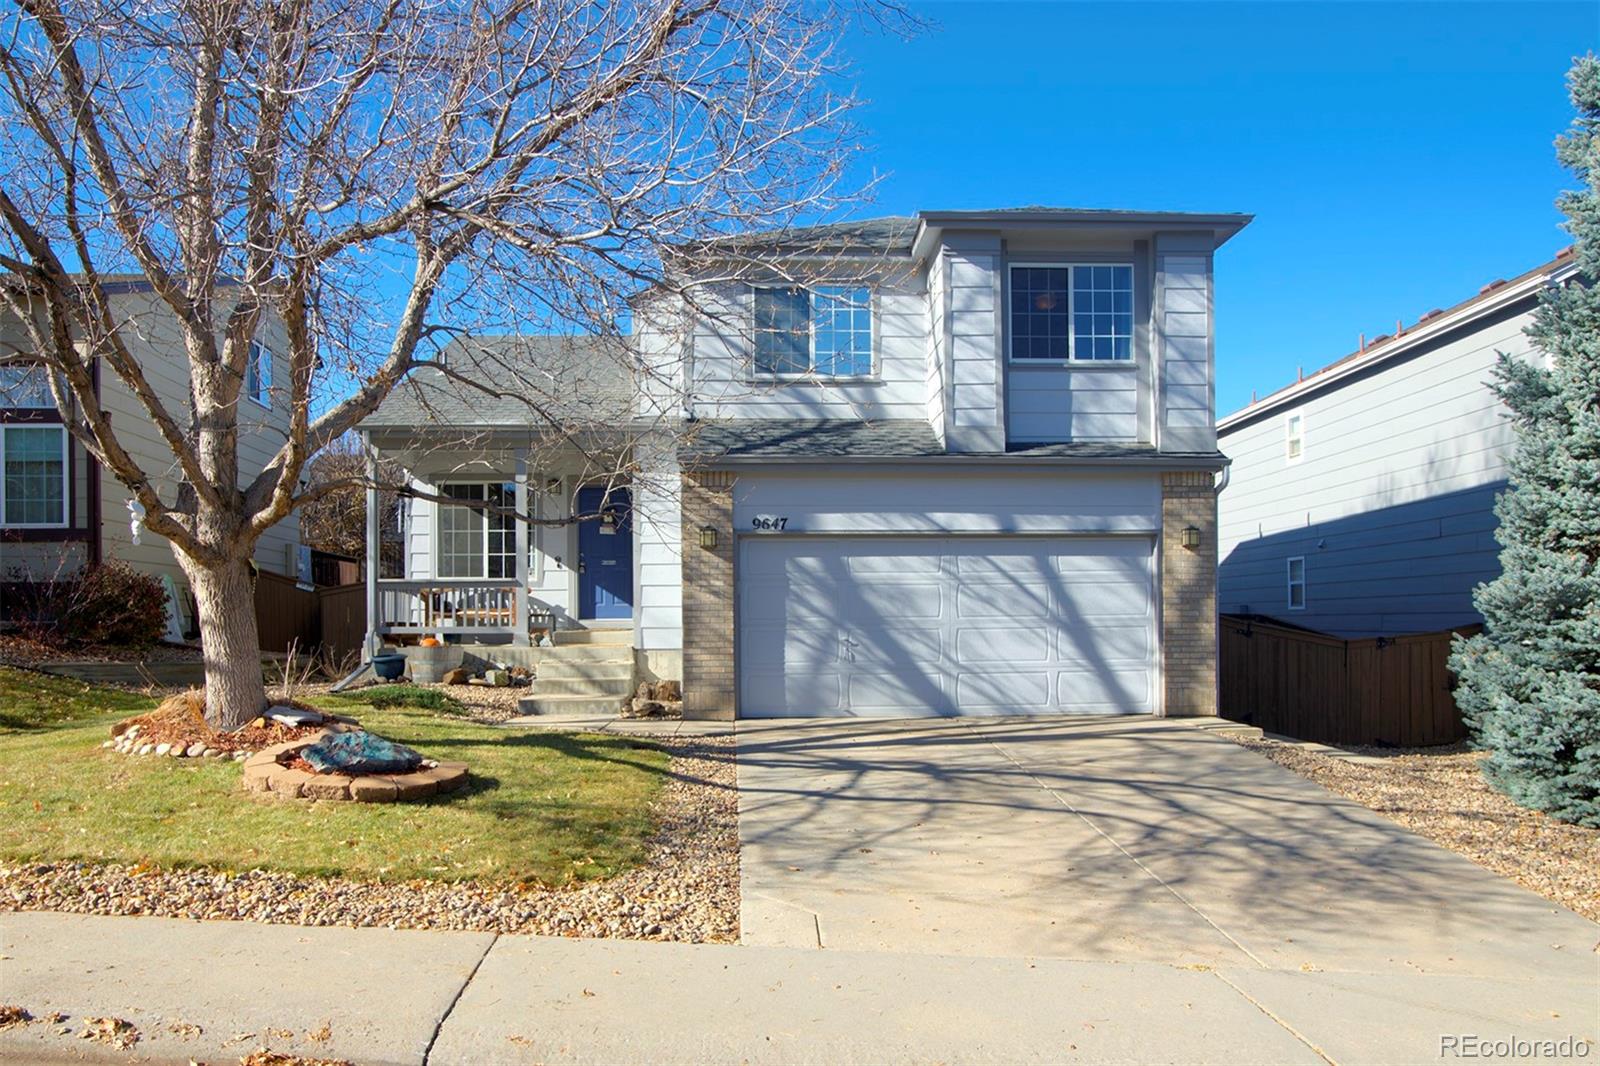 9647  Cove Creek Drive, highlands ranch MLS: 3467154 Beds: 3 Baths: 3 Price: $585,000